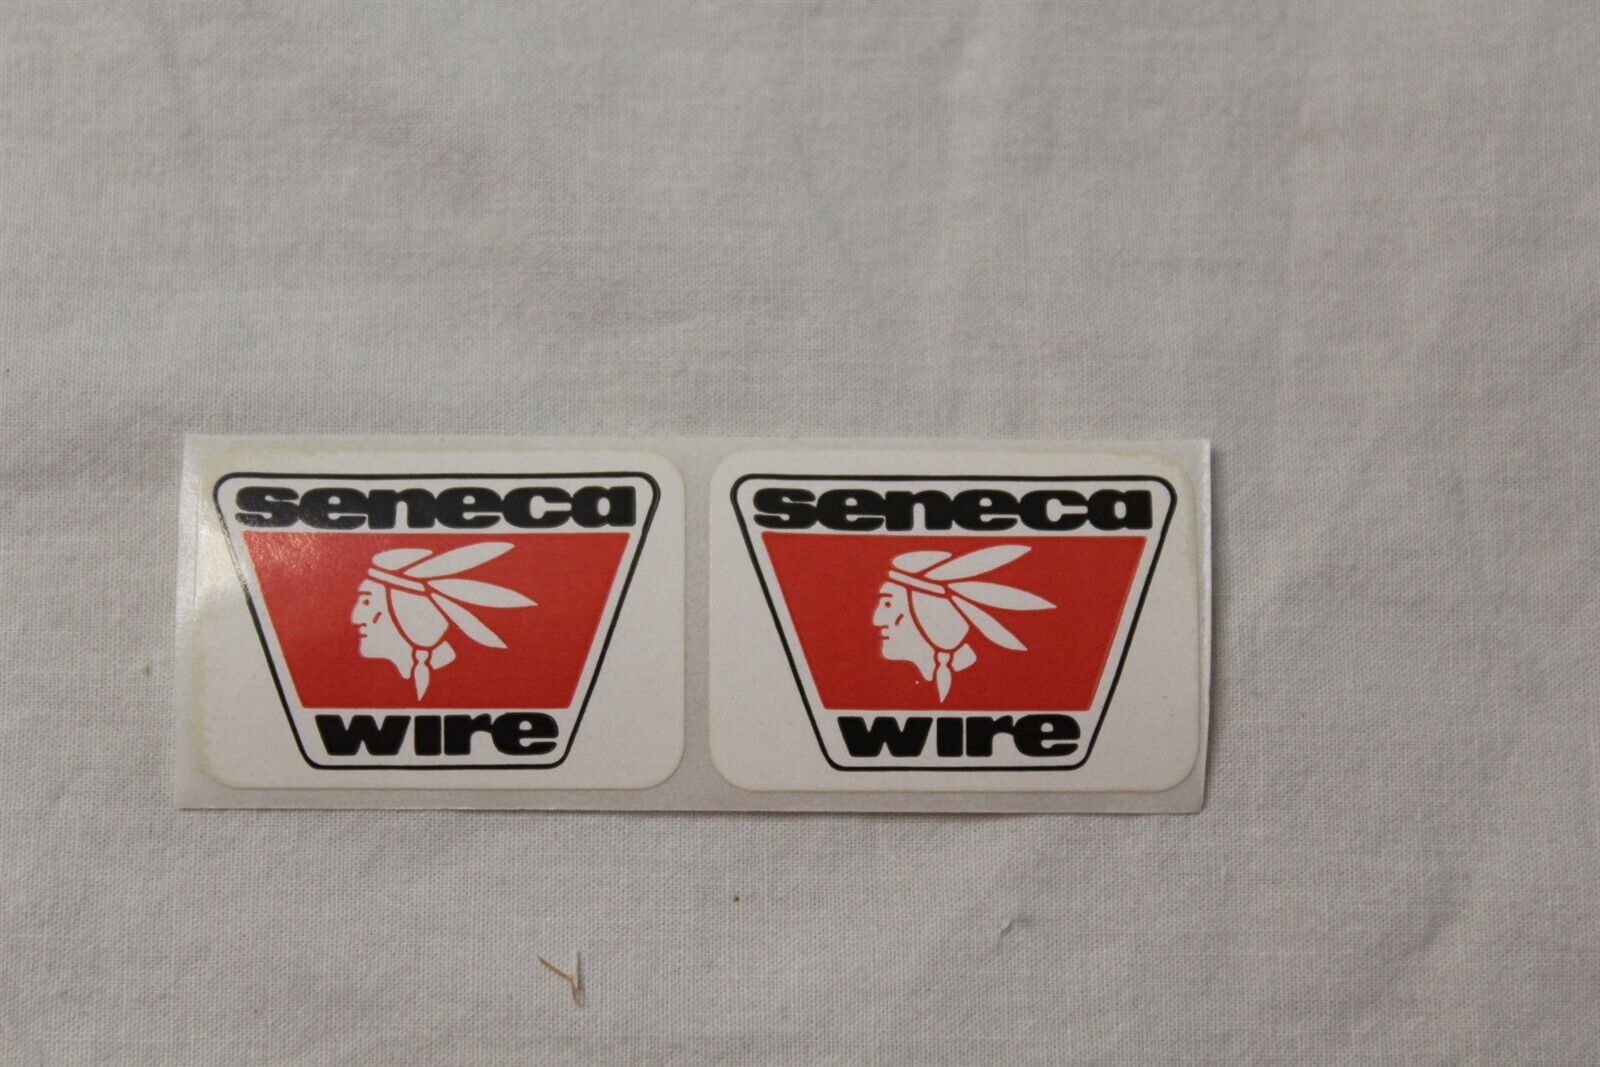  Sticker Badge Decal Label Advertising Seneca Wire x2 Collectible